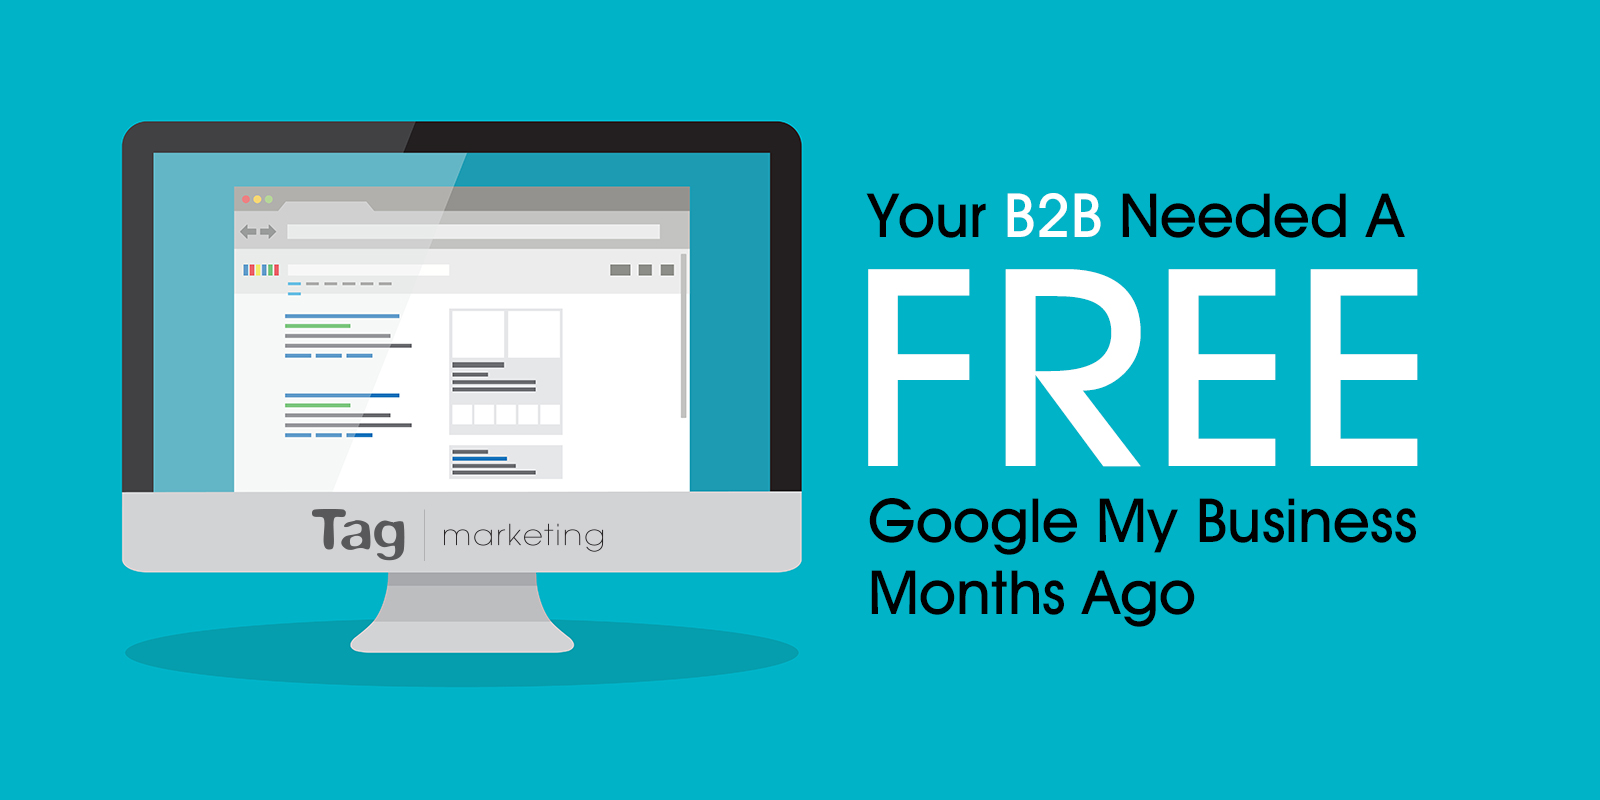 Your B2B Needed A FREE Google My Business (GMB) Like Months Ago